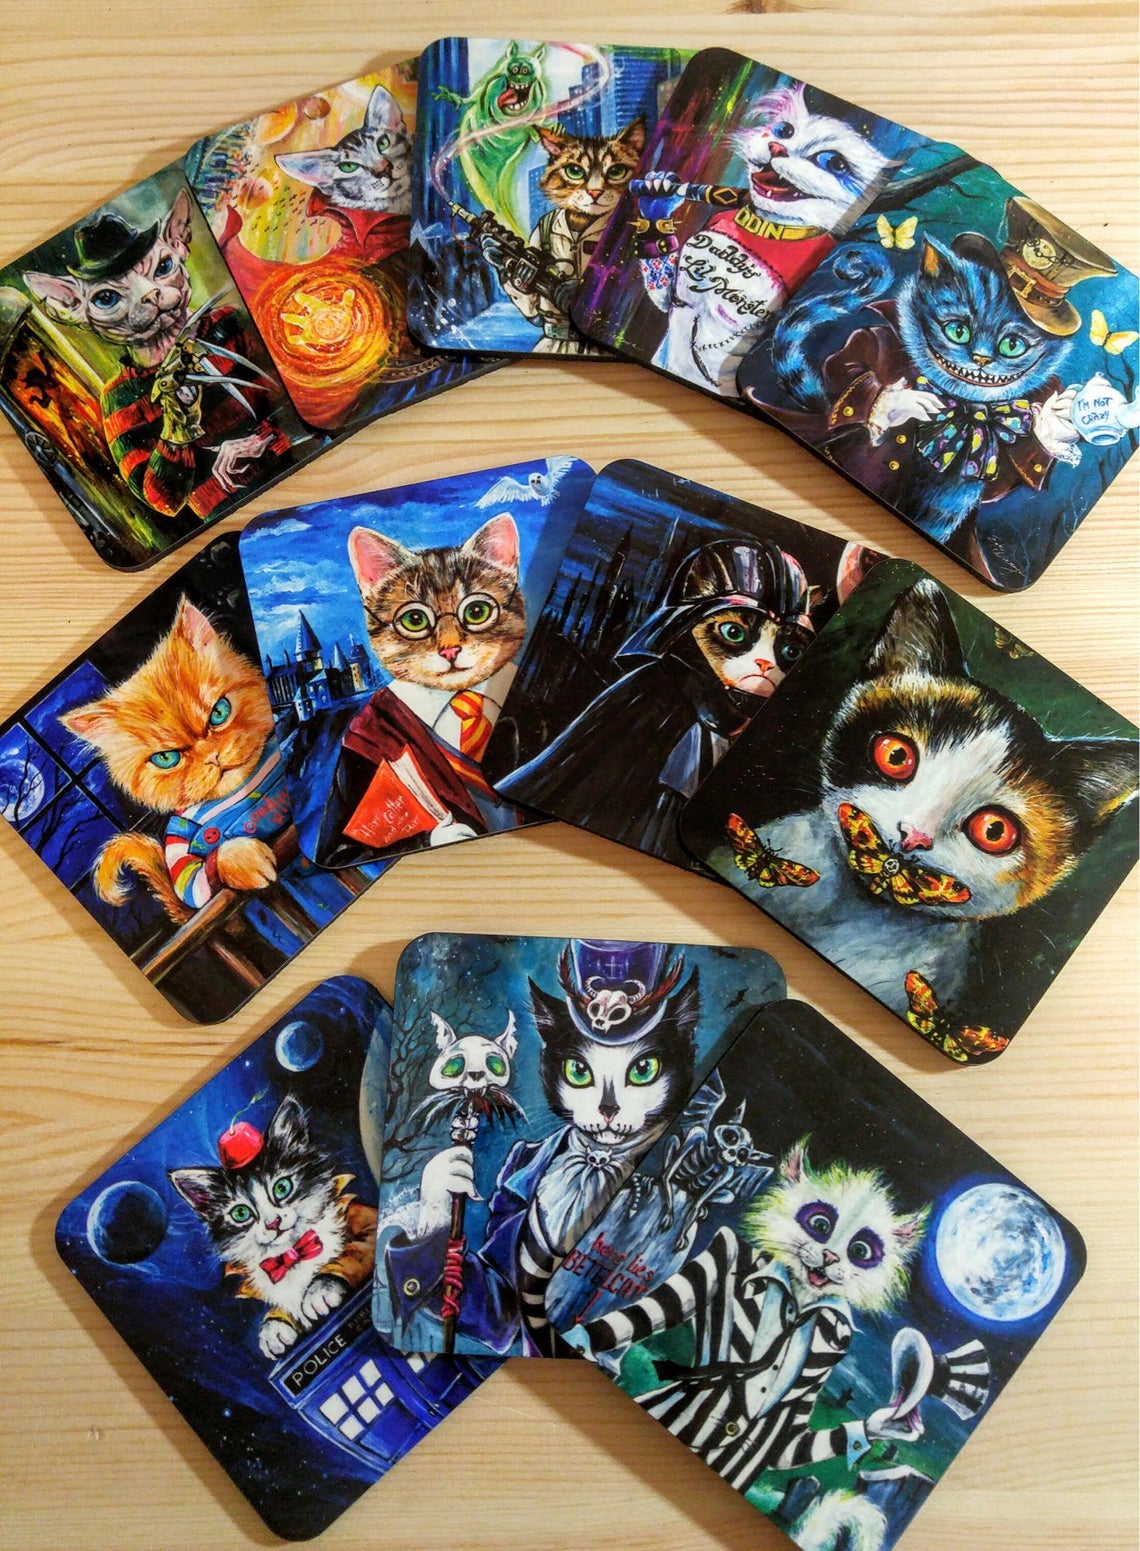 COASTER SETS, Image of your choice! See Directions below